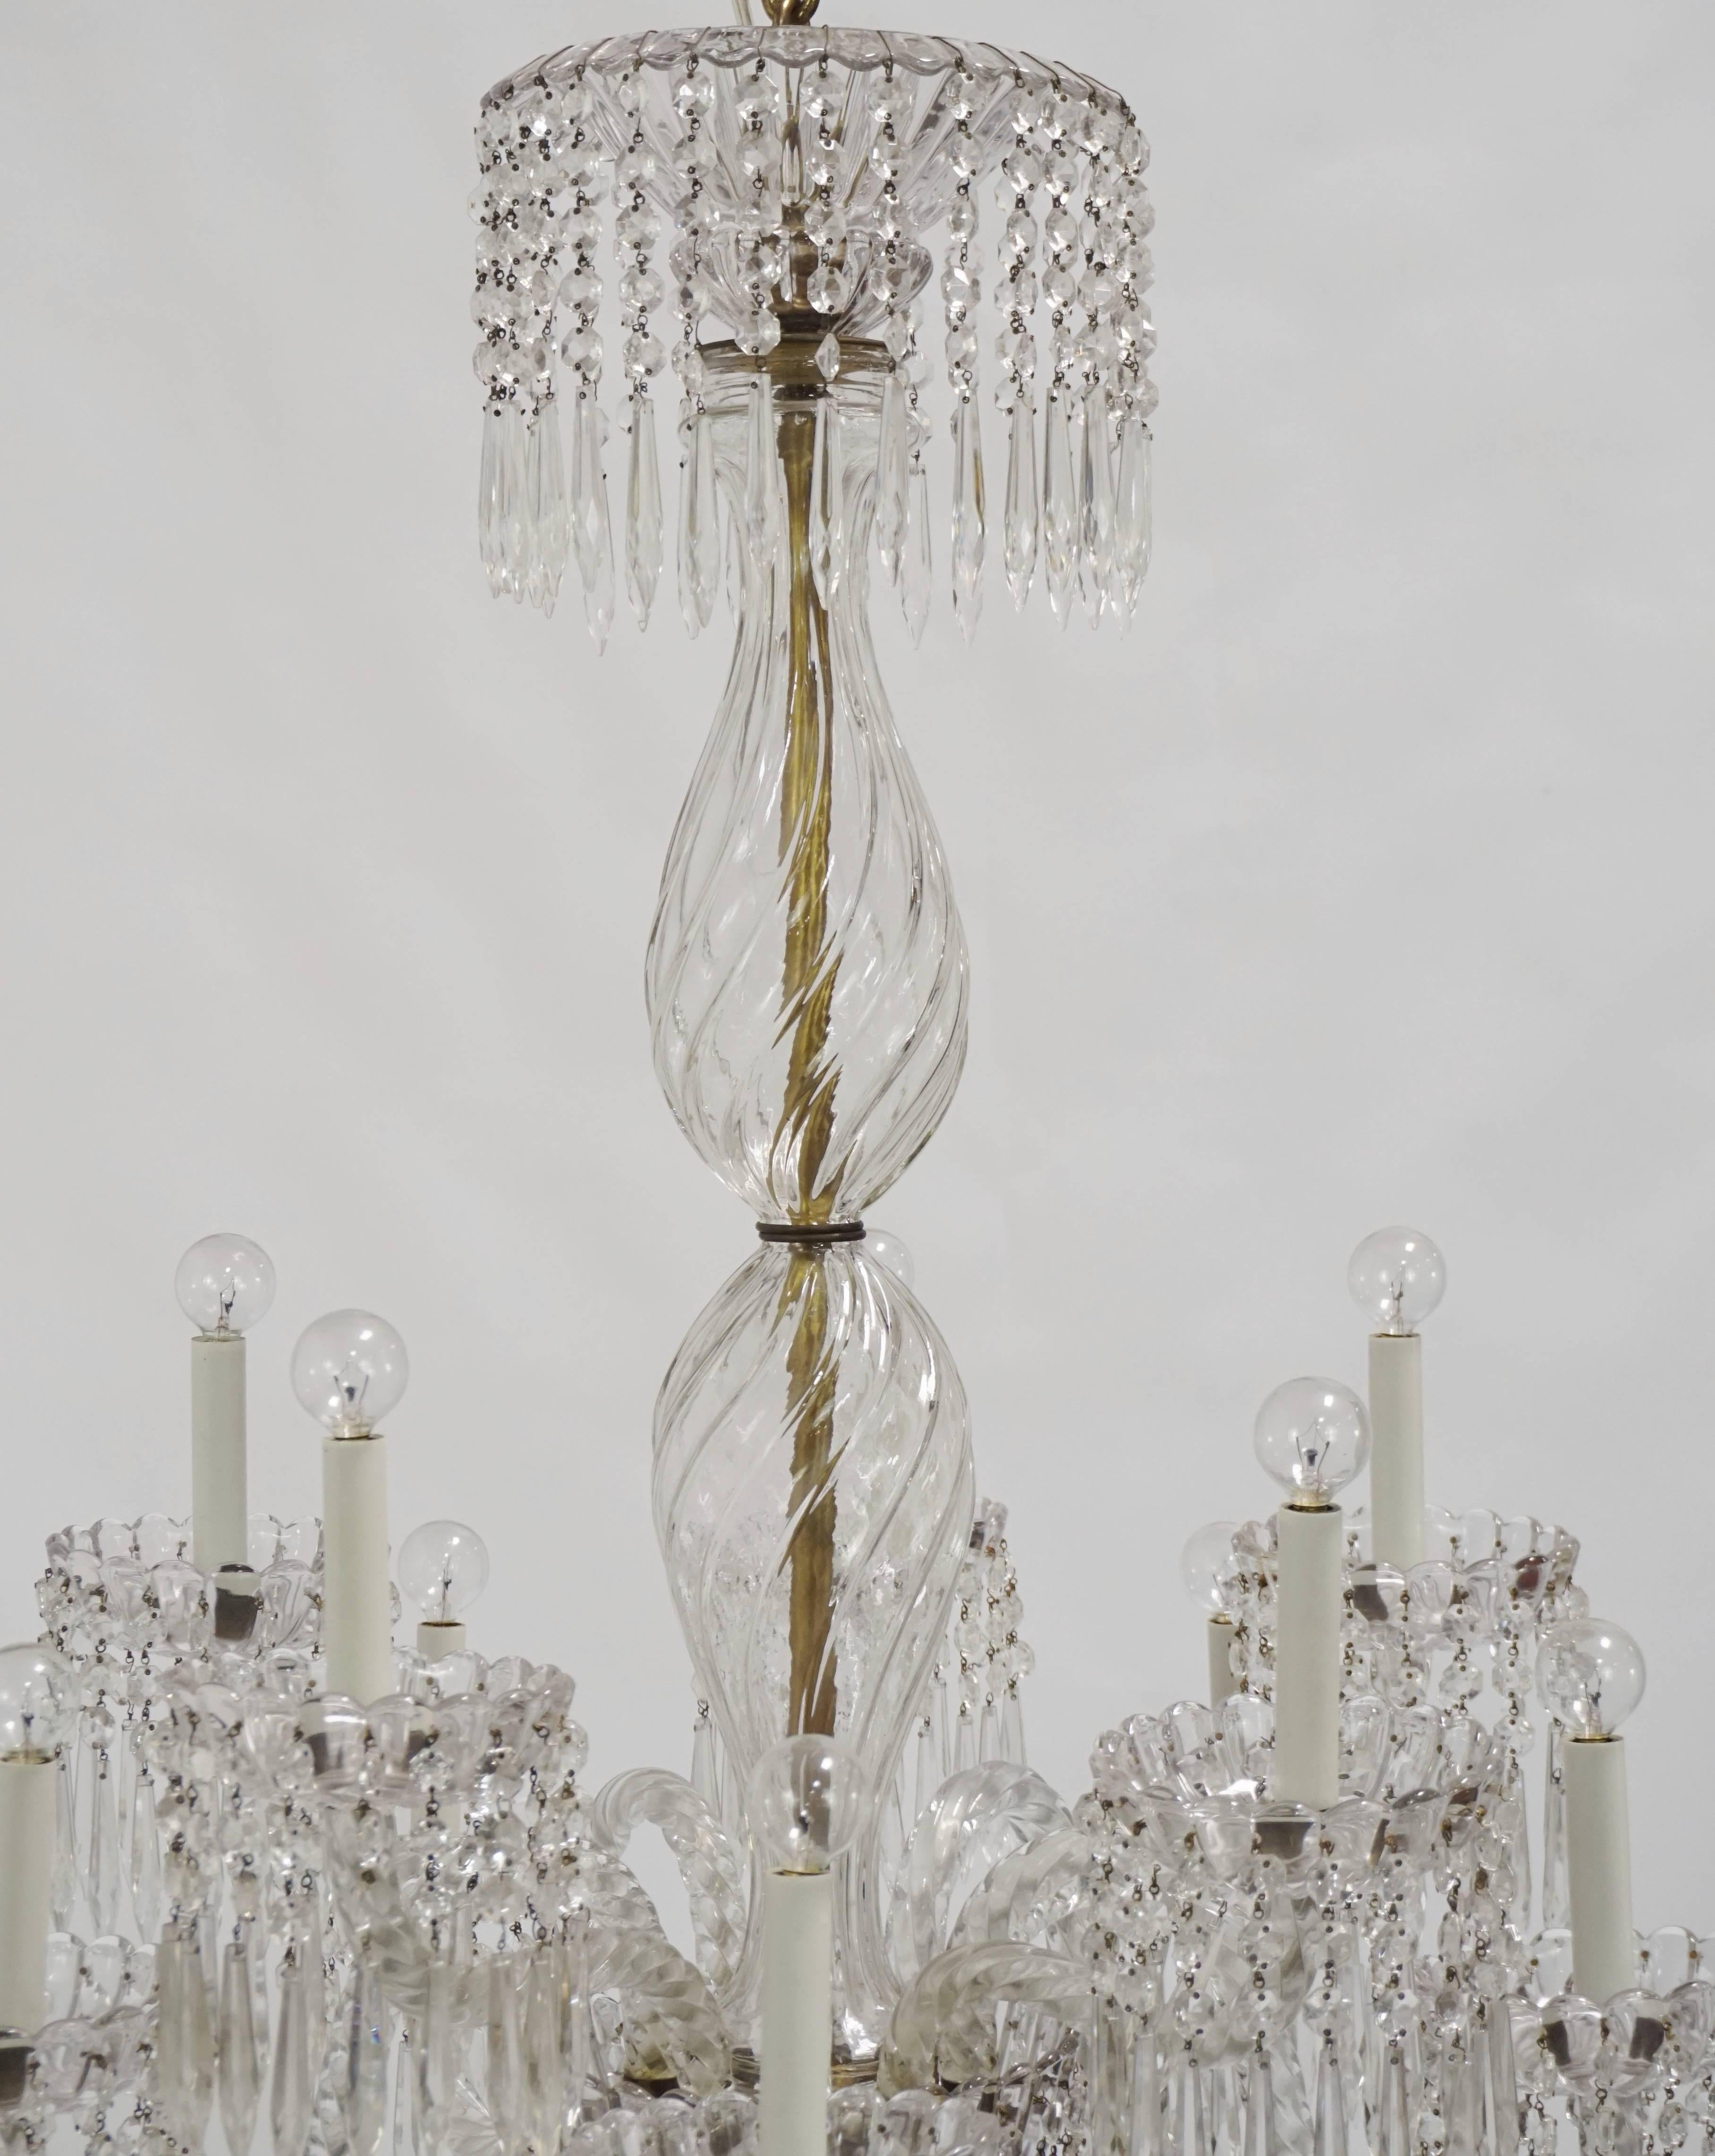 Antique Baccarat Undulating 10-Armed Crystal Waterfalls Chandelier 1